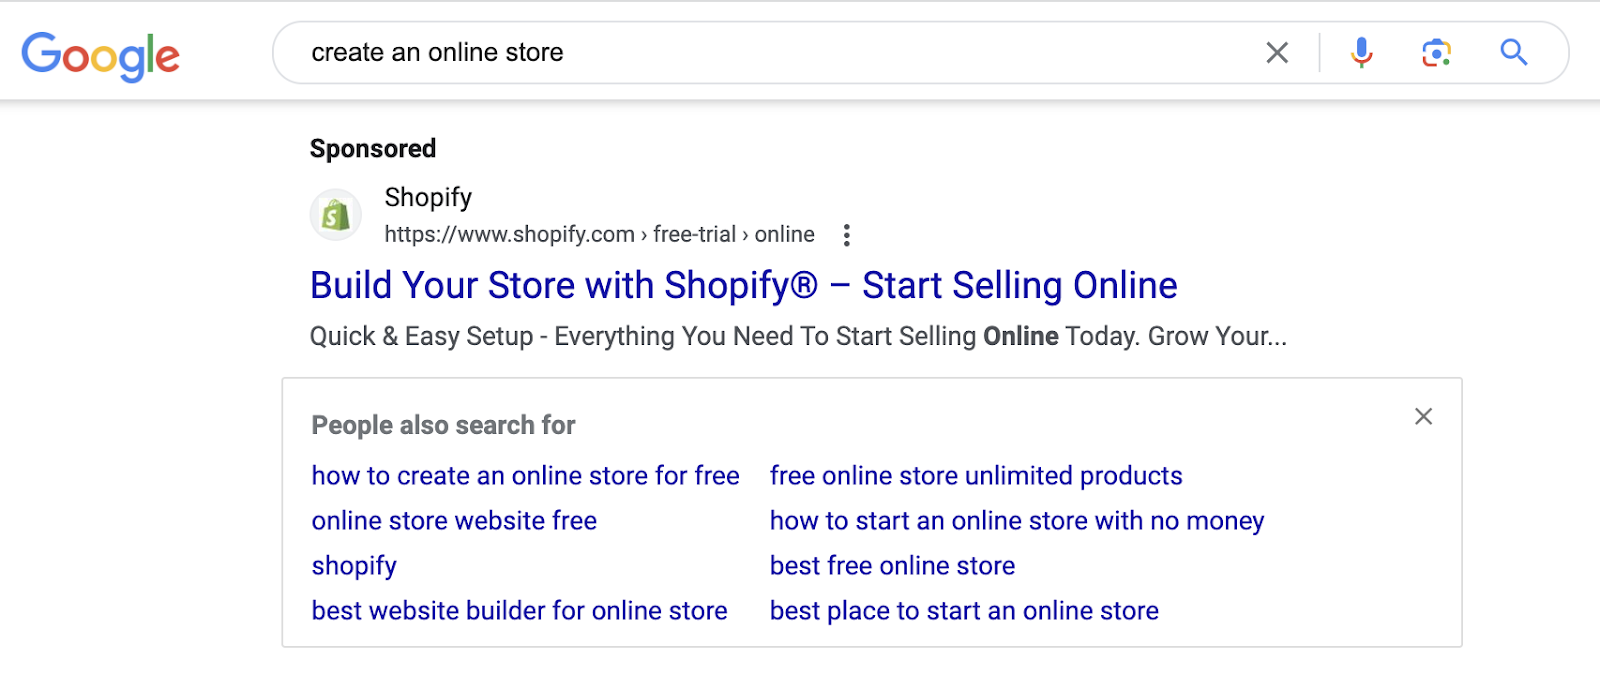 Shopify's sponsored result on Google SERP for “create an online store” query